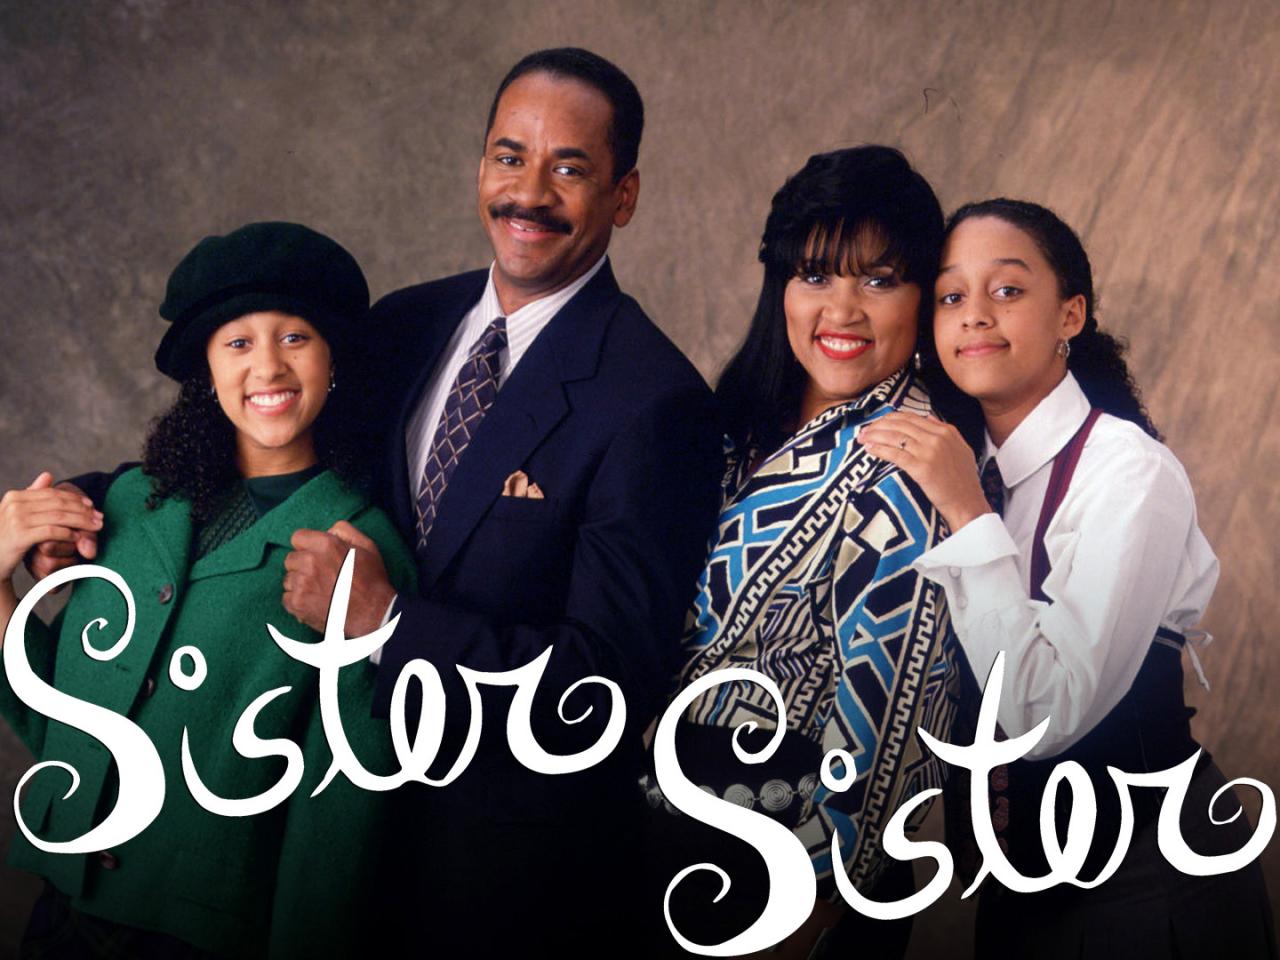 Sister mowry sitcoms abc sisters show 90s years intros twin seem forget brother huffpost premiered rank since let been so